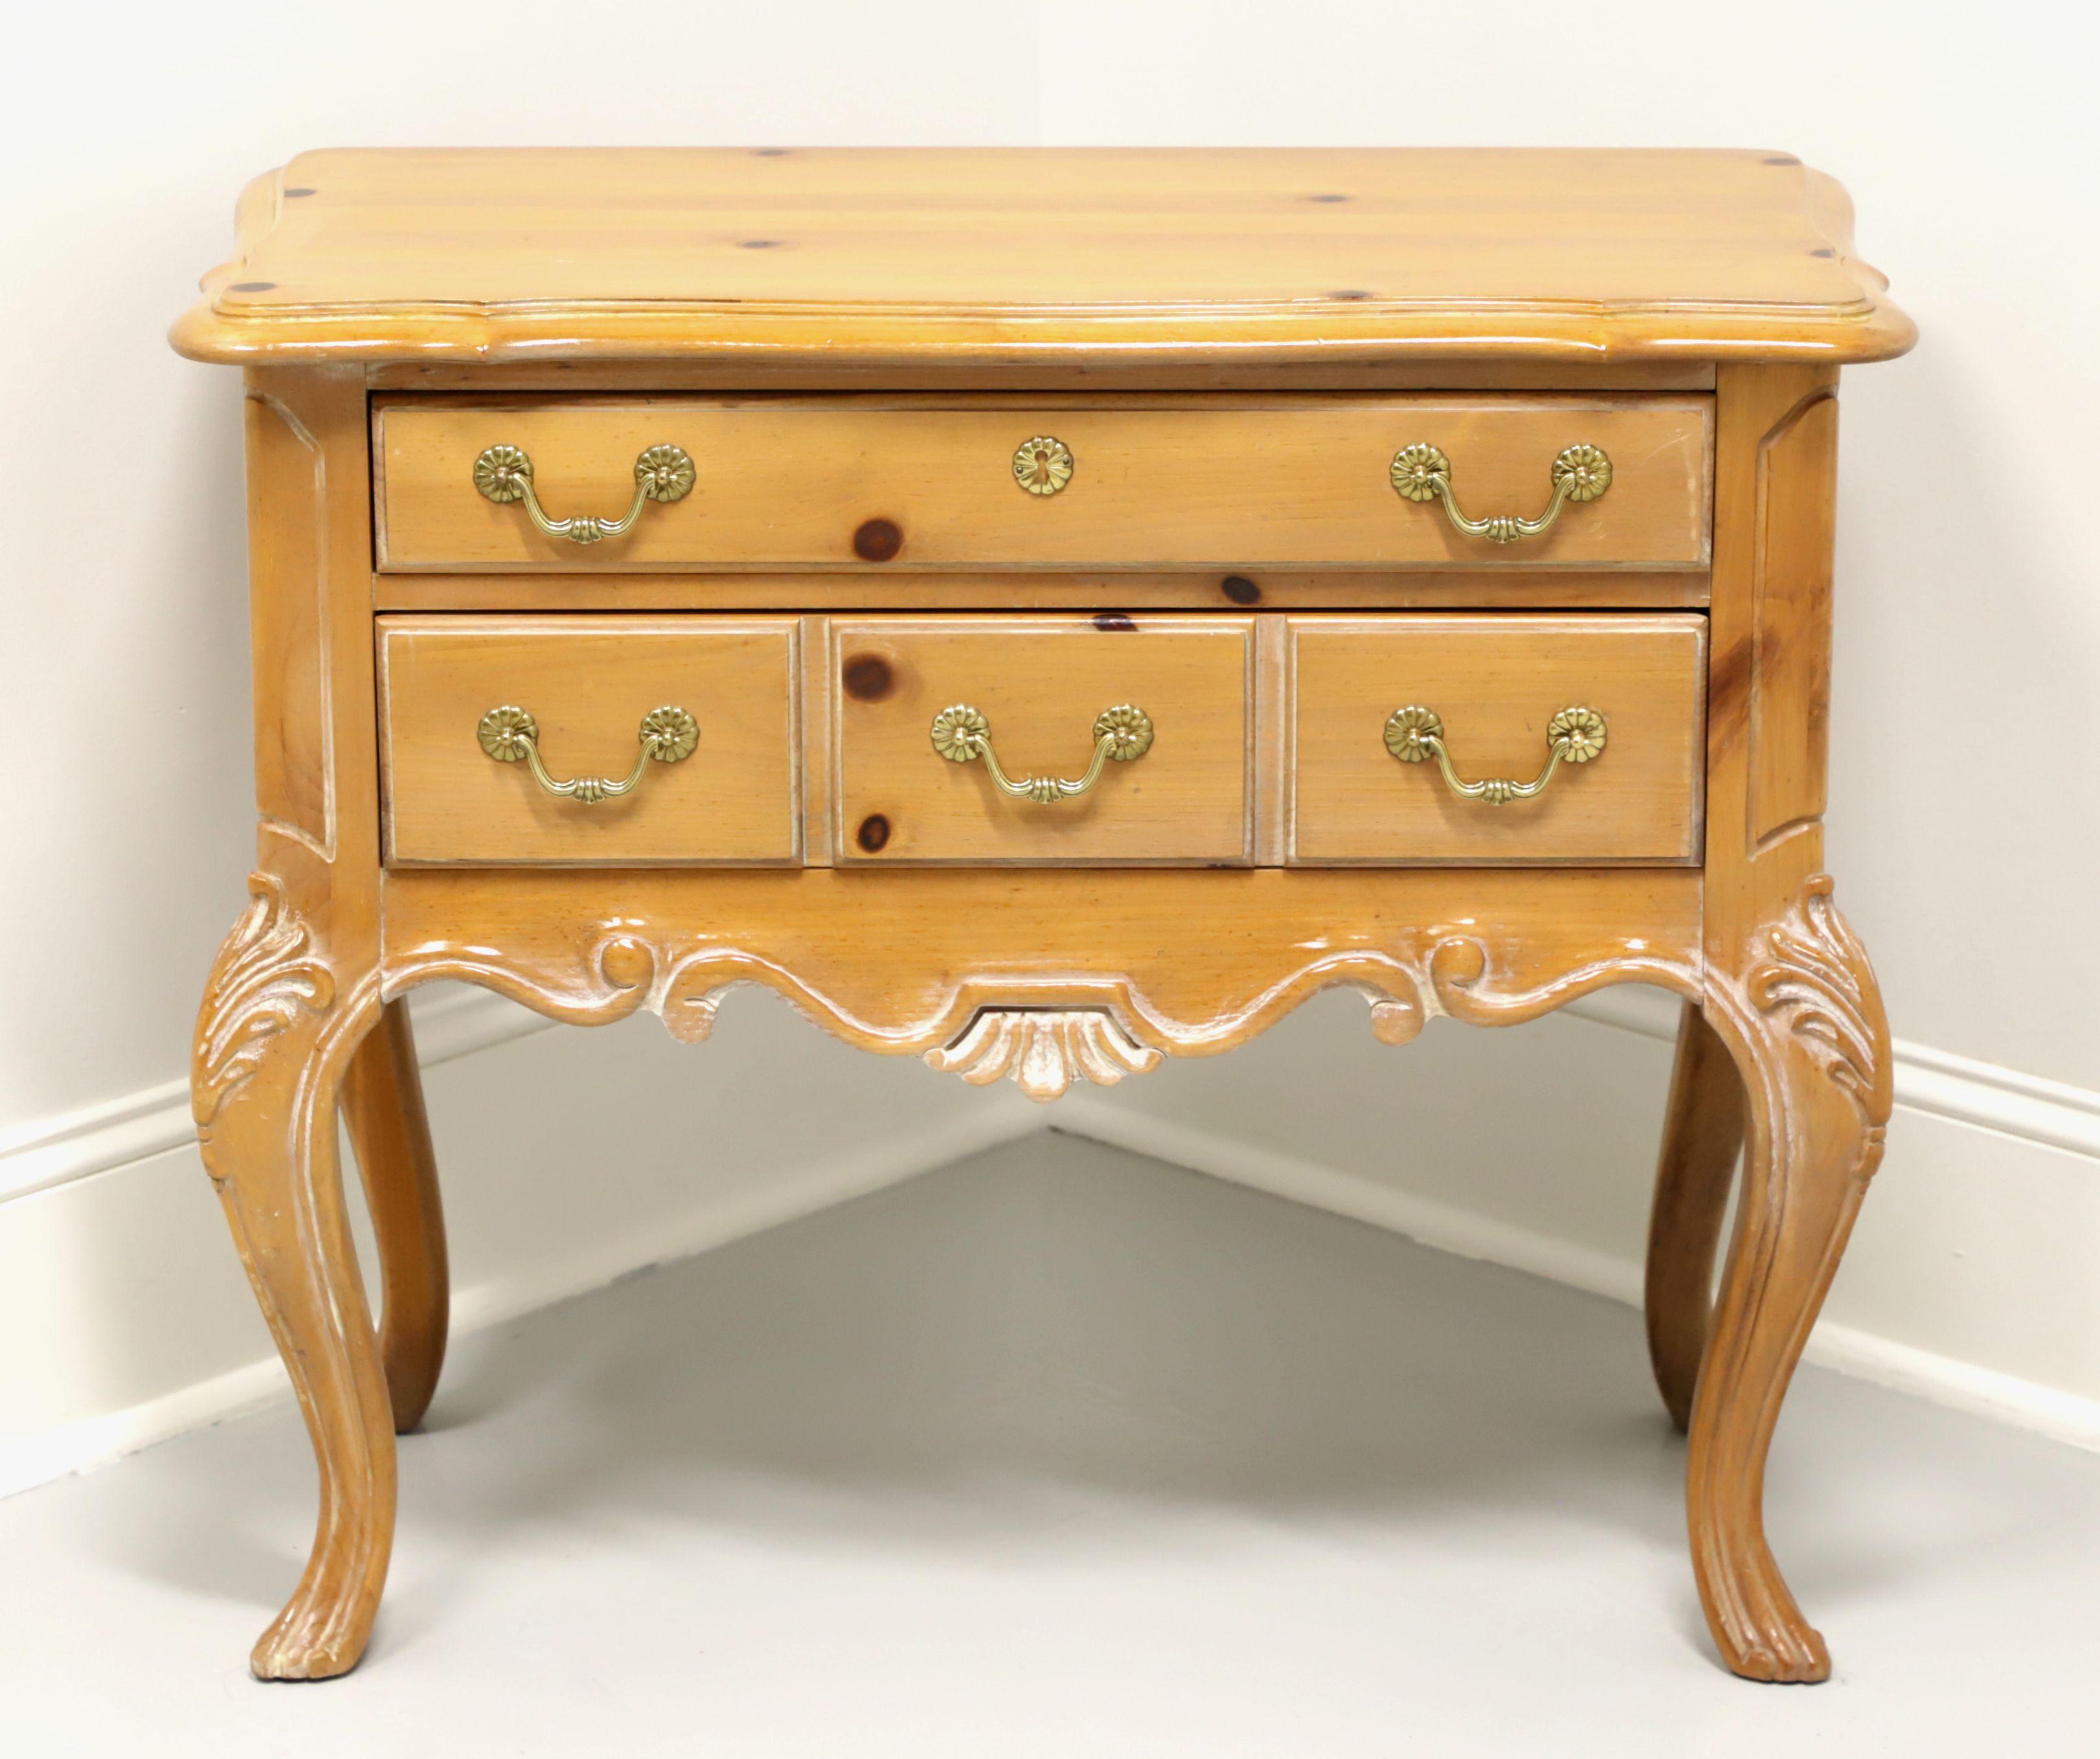 A French Country style lowboy chest by Gordon's Furniture, of Johnson City, Tennessee, USA. Solid pine with an antiqued finish, brass hardware, carved apron & knees and curved legs. Features two drawers of dovetail construction, upper with faux